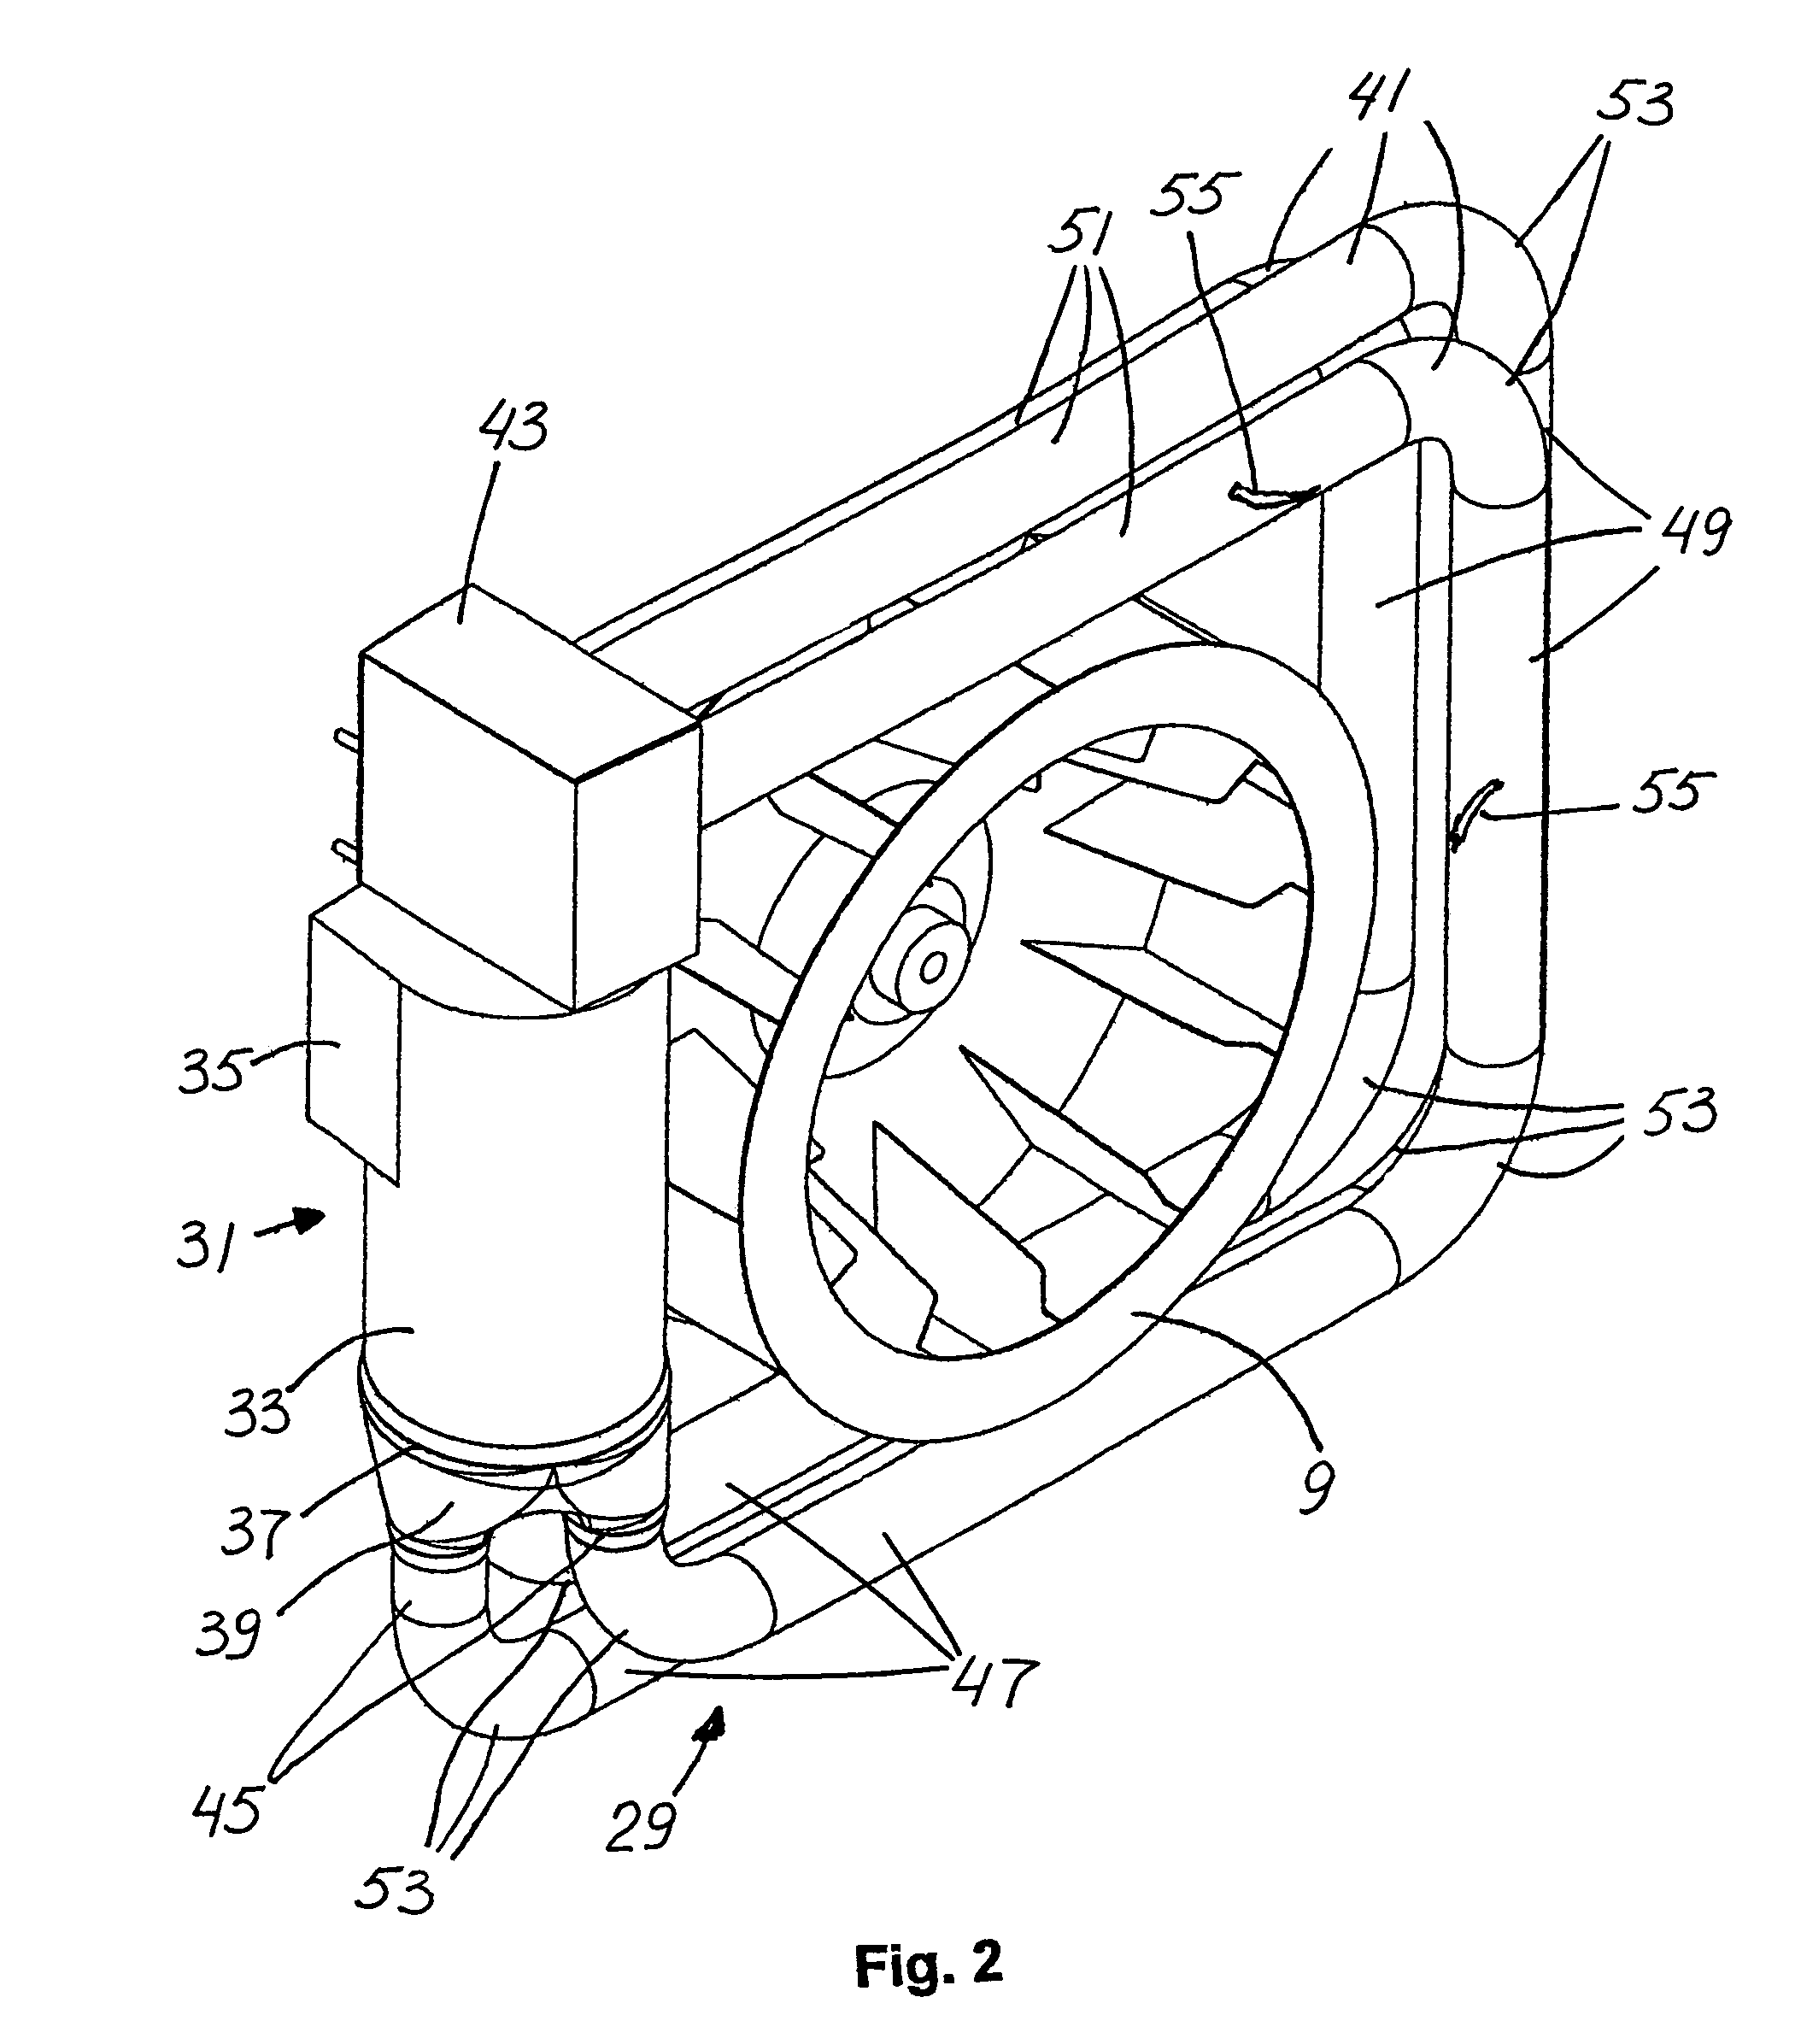 Apparatus for treating and preparing food by gas-fired heating and a heat exchange device for such an apparatus